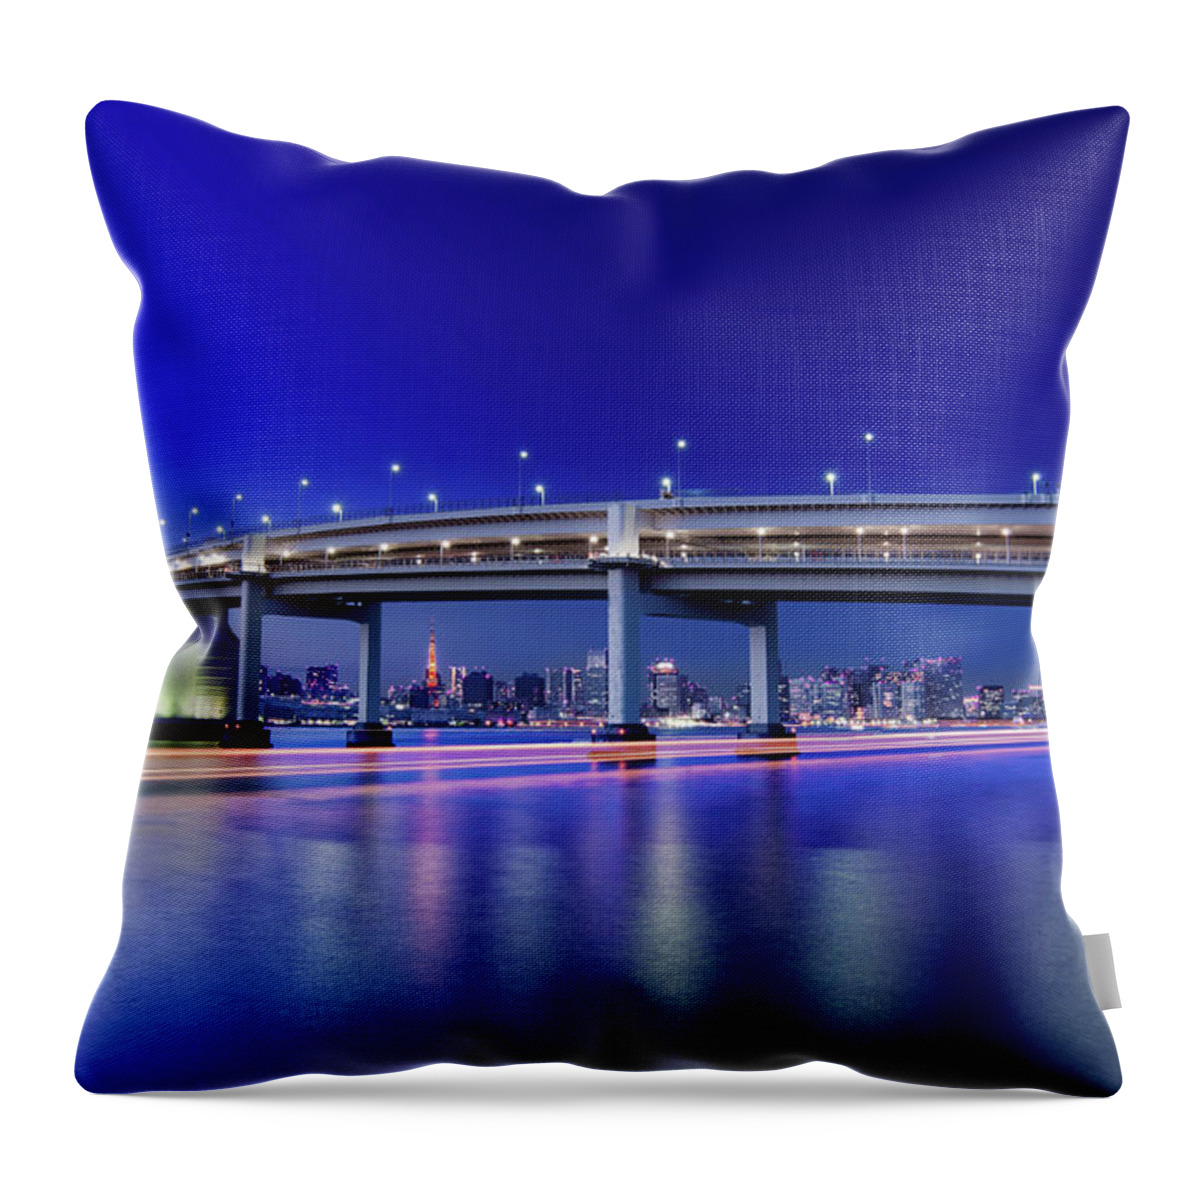 Built Structure Throw Pillow featuring the photograph Rainbow Bridge Rainbow by Image Provided By Duane Walker